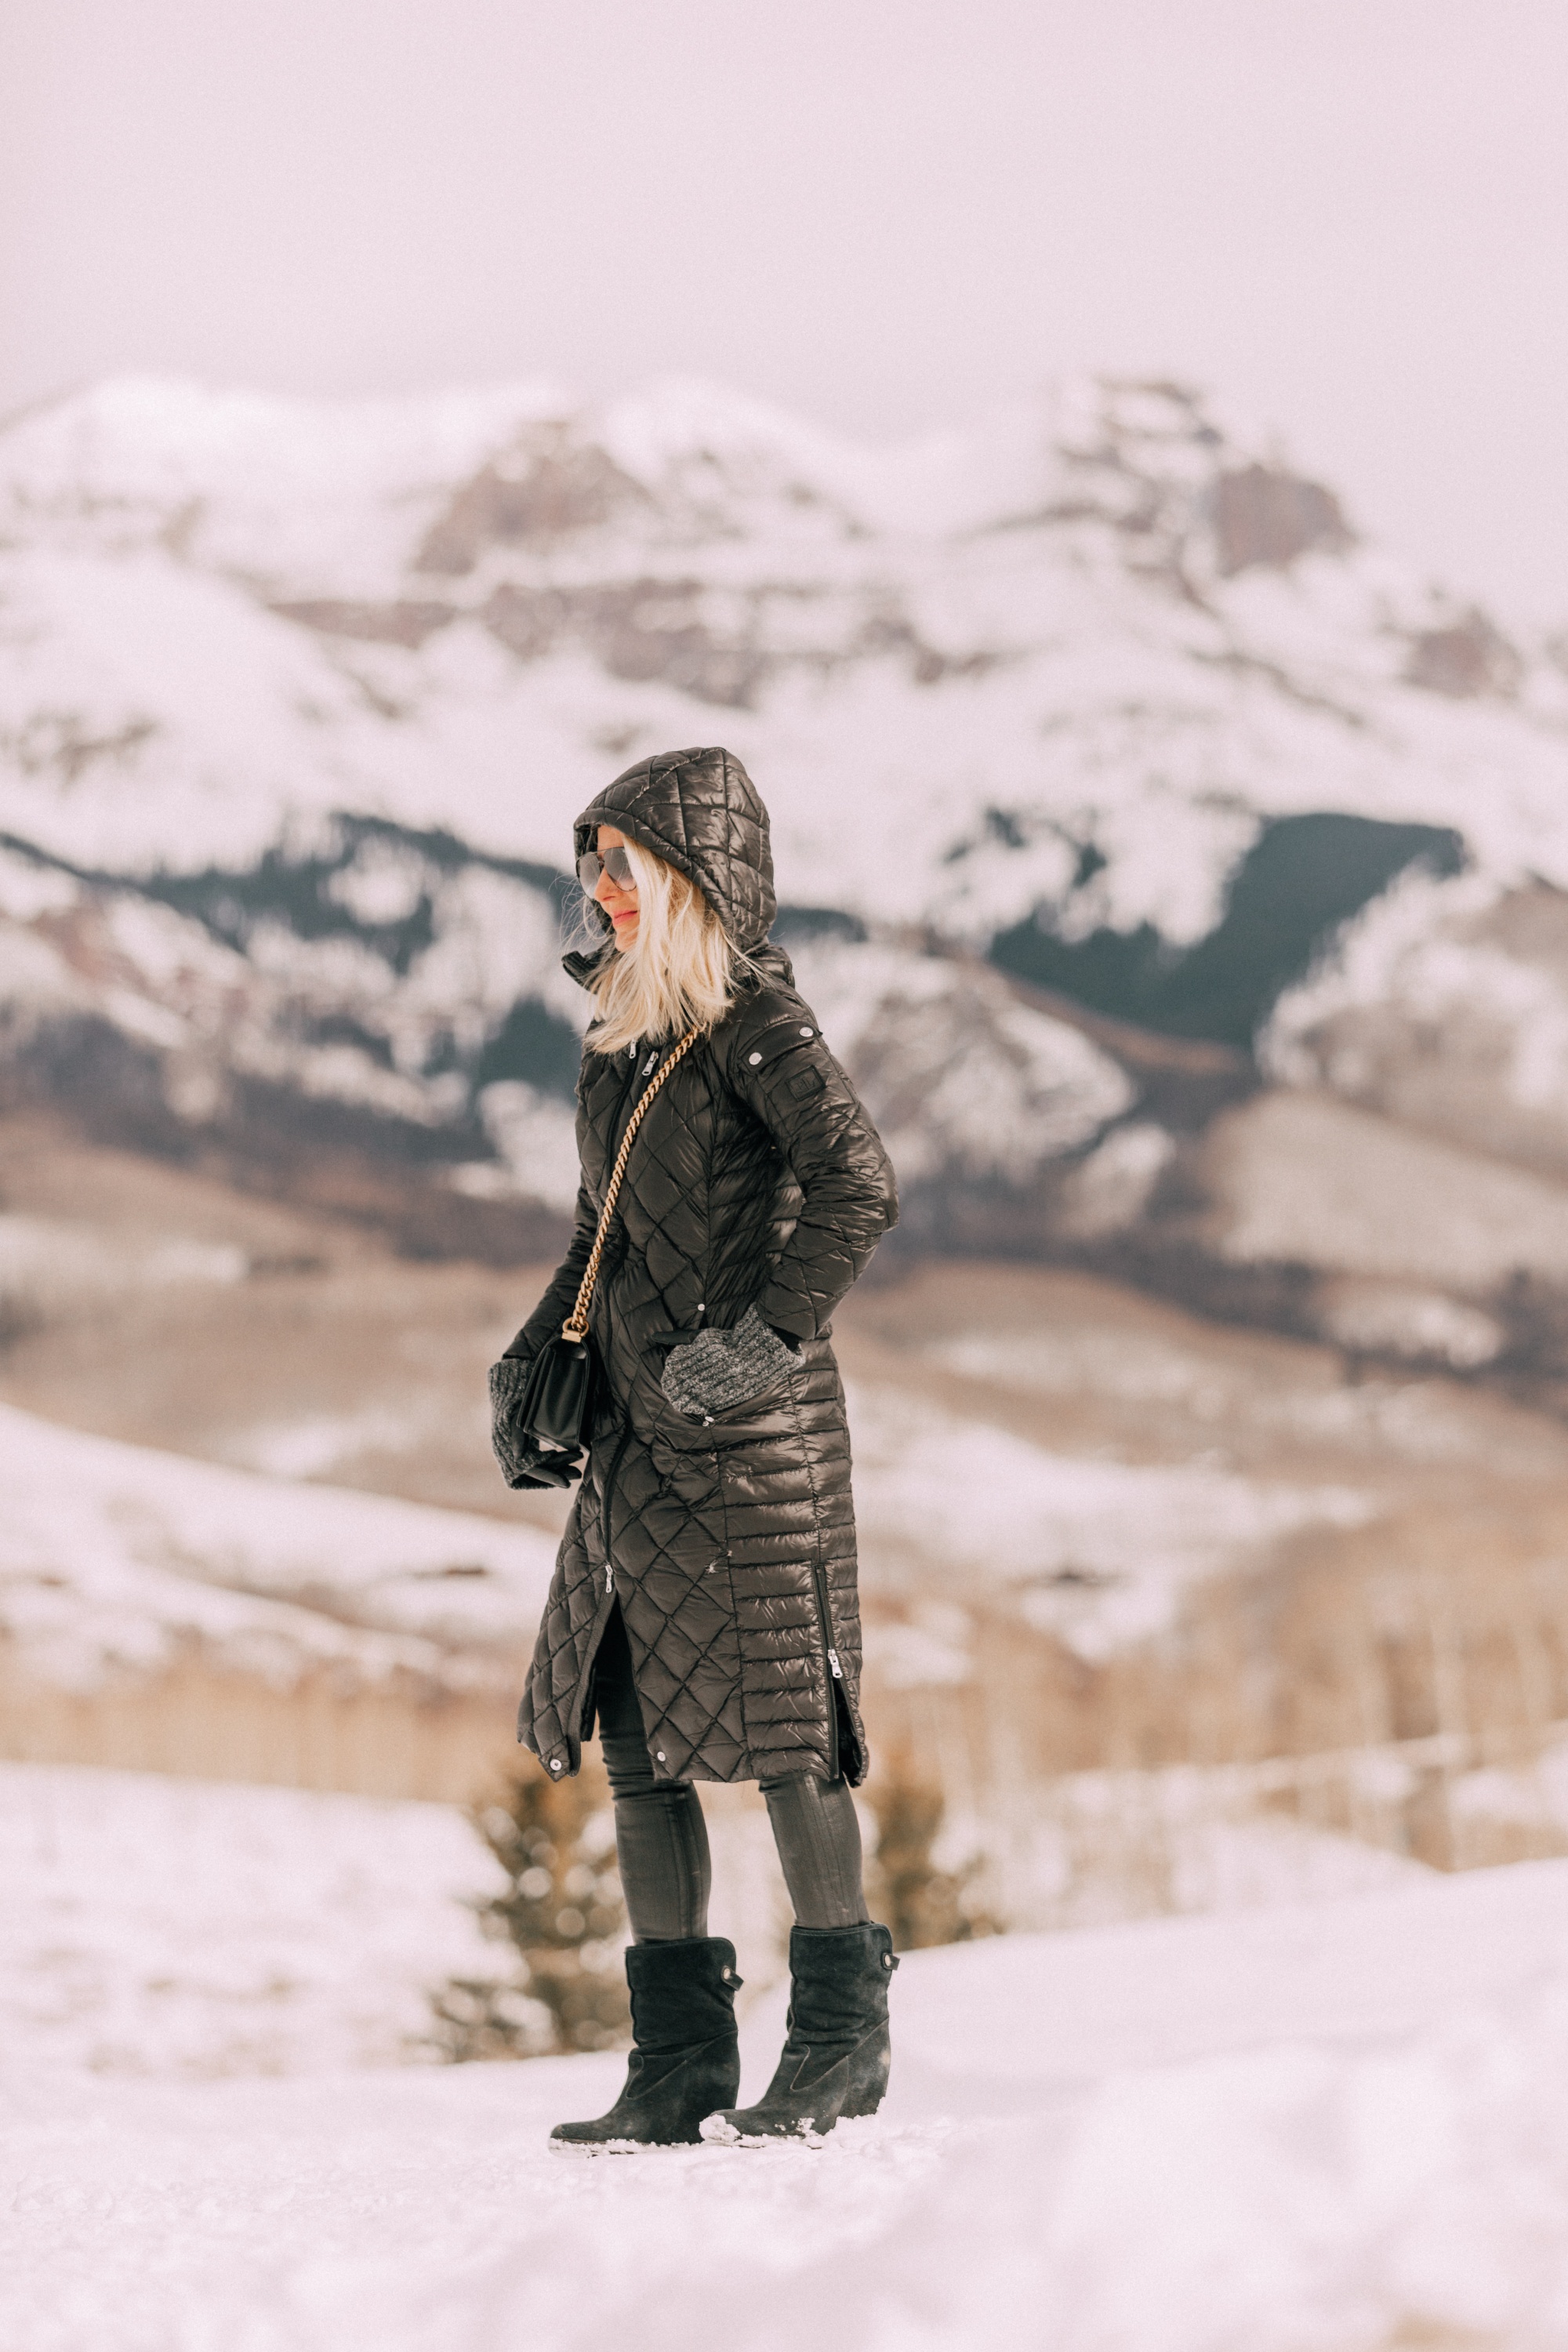 puffer coat outfit Fashion blogger wearing Herno puffer coat over black turtleneck sweater with Citizens of Humanity Rocket leatherette skinny jeans, Ugg wedge boots in Telluride, CO